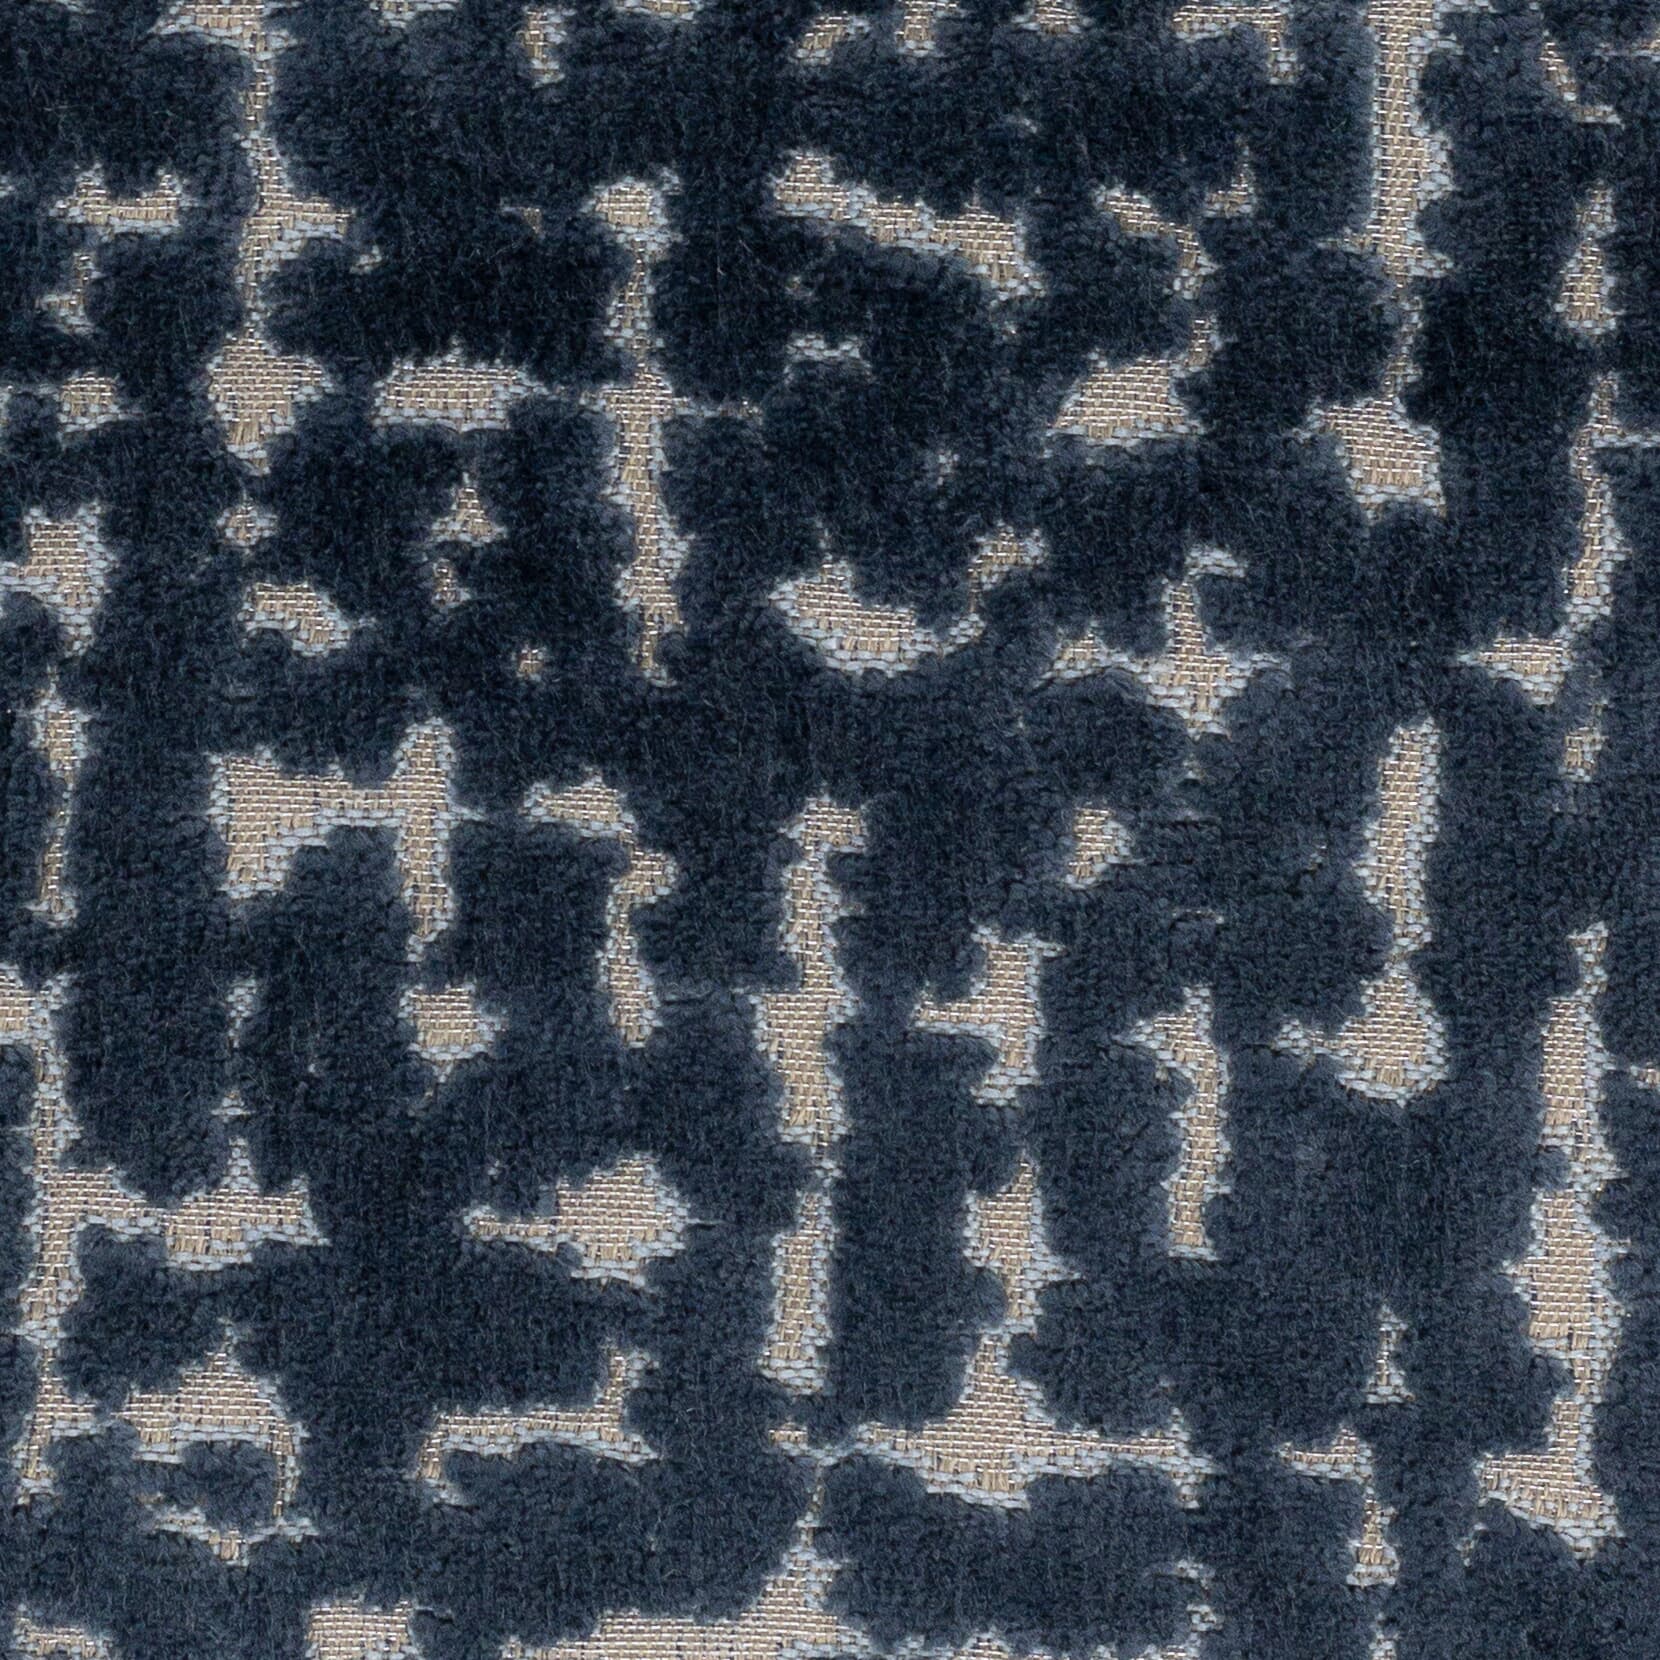 Nimrah 4 Dresden by Stout Fabric